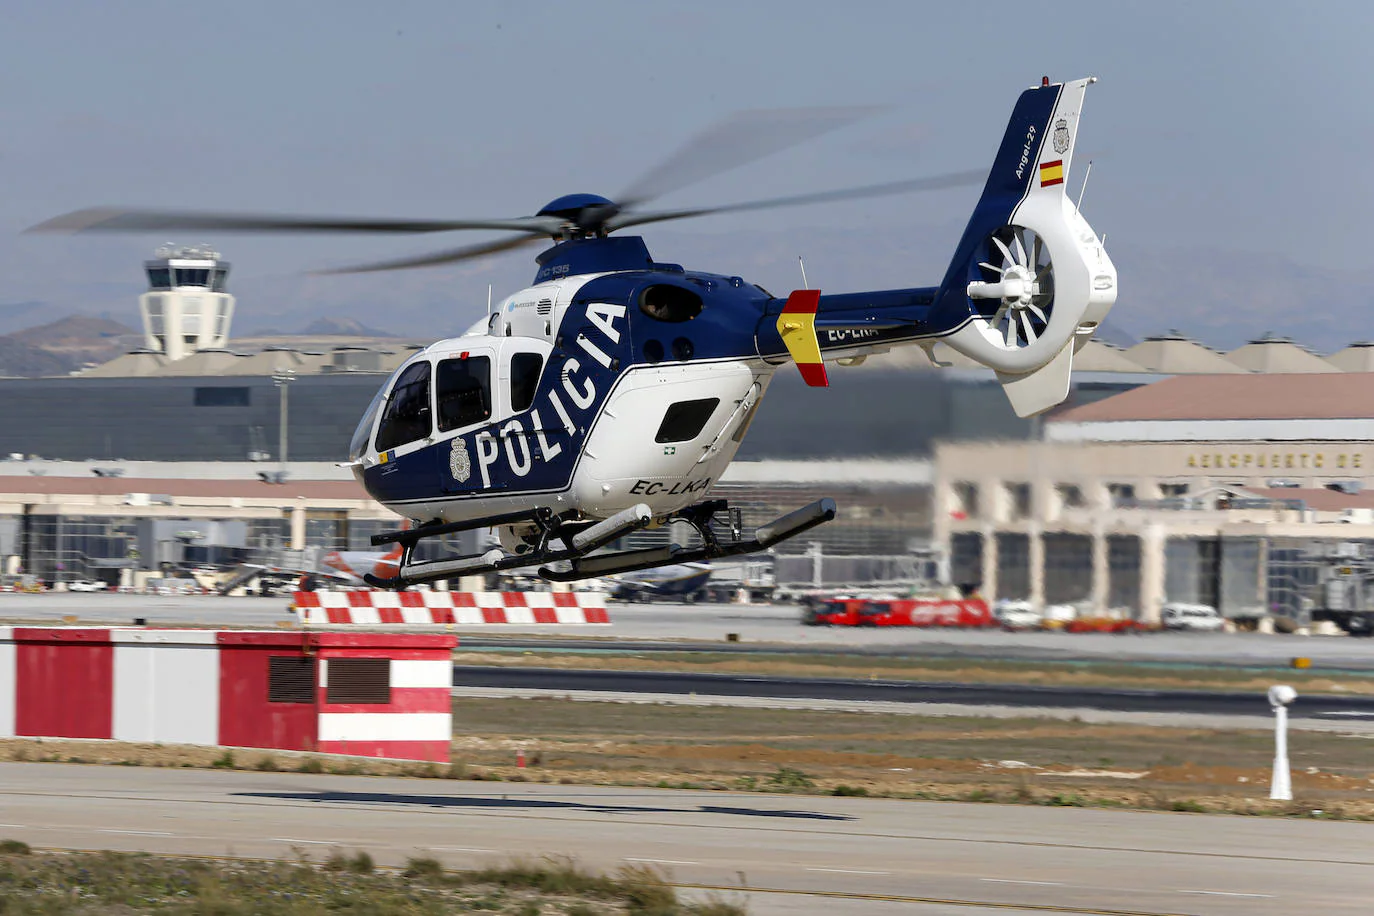 Since 1986, the Spanish National Police have been watching criminals from above in their Air Unit. 